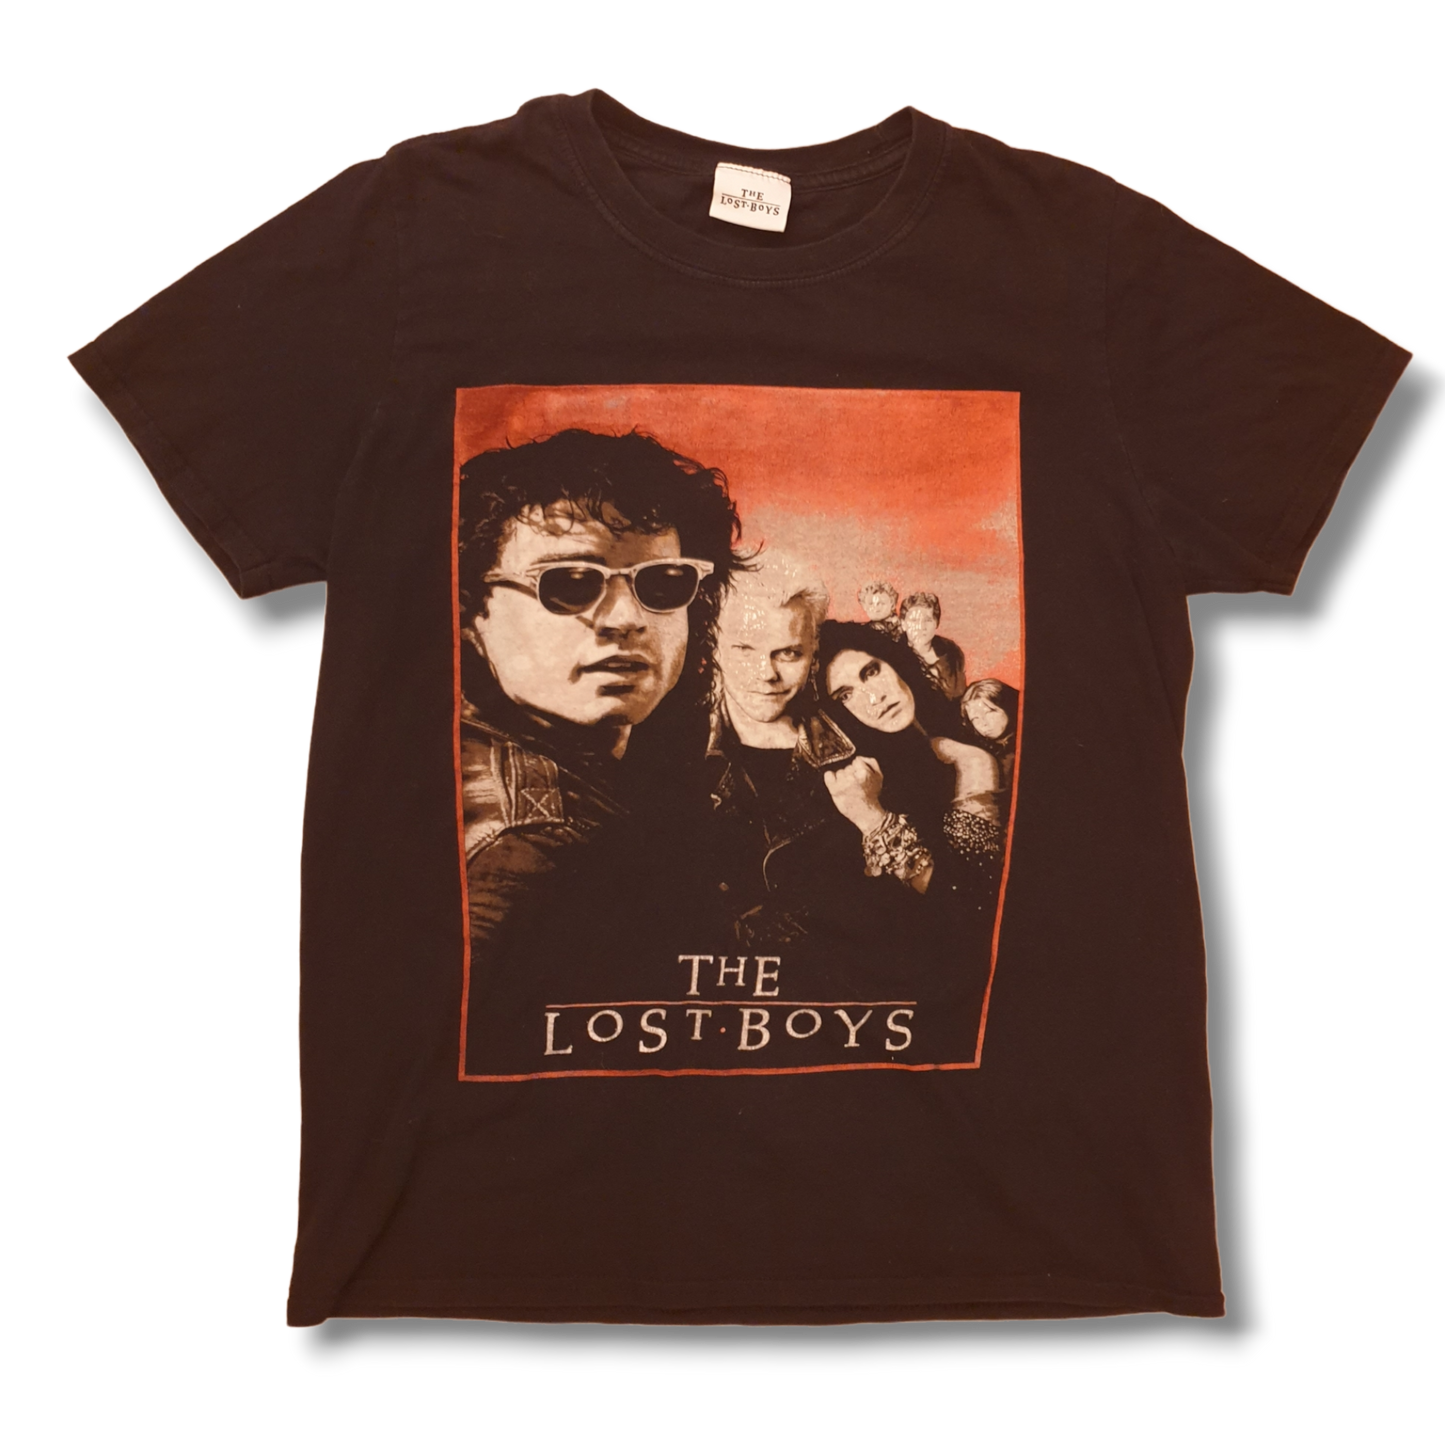 The Lost Boys T-Shirt S